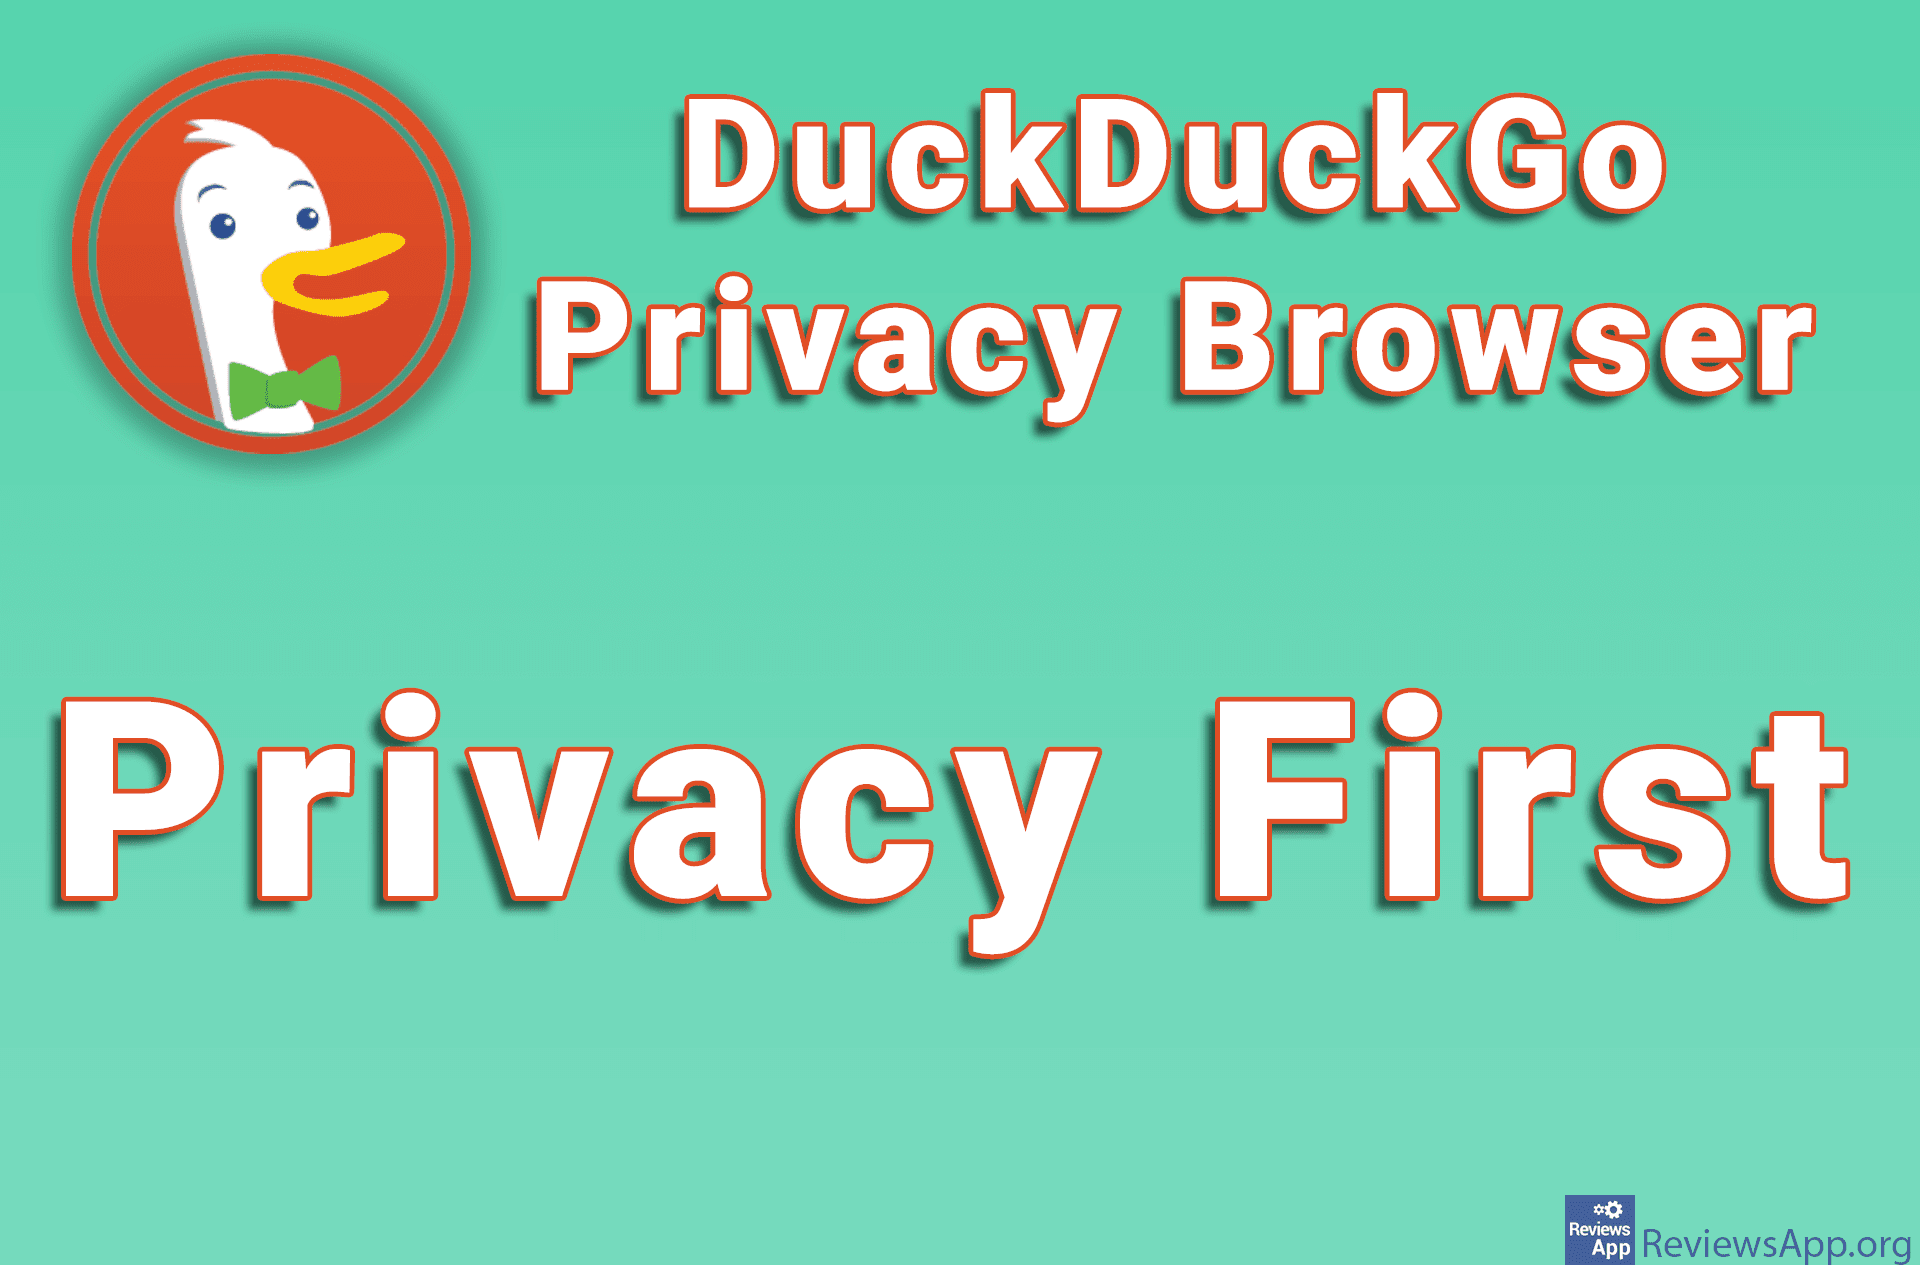 DuckDuckGo Privacy Browser – Privacy First